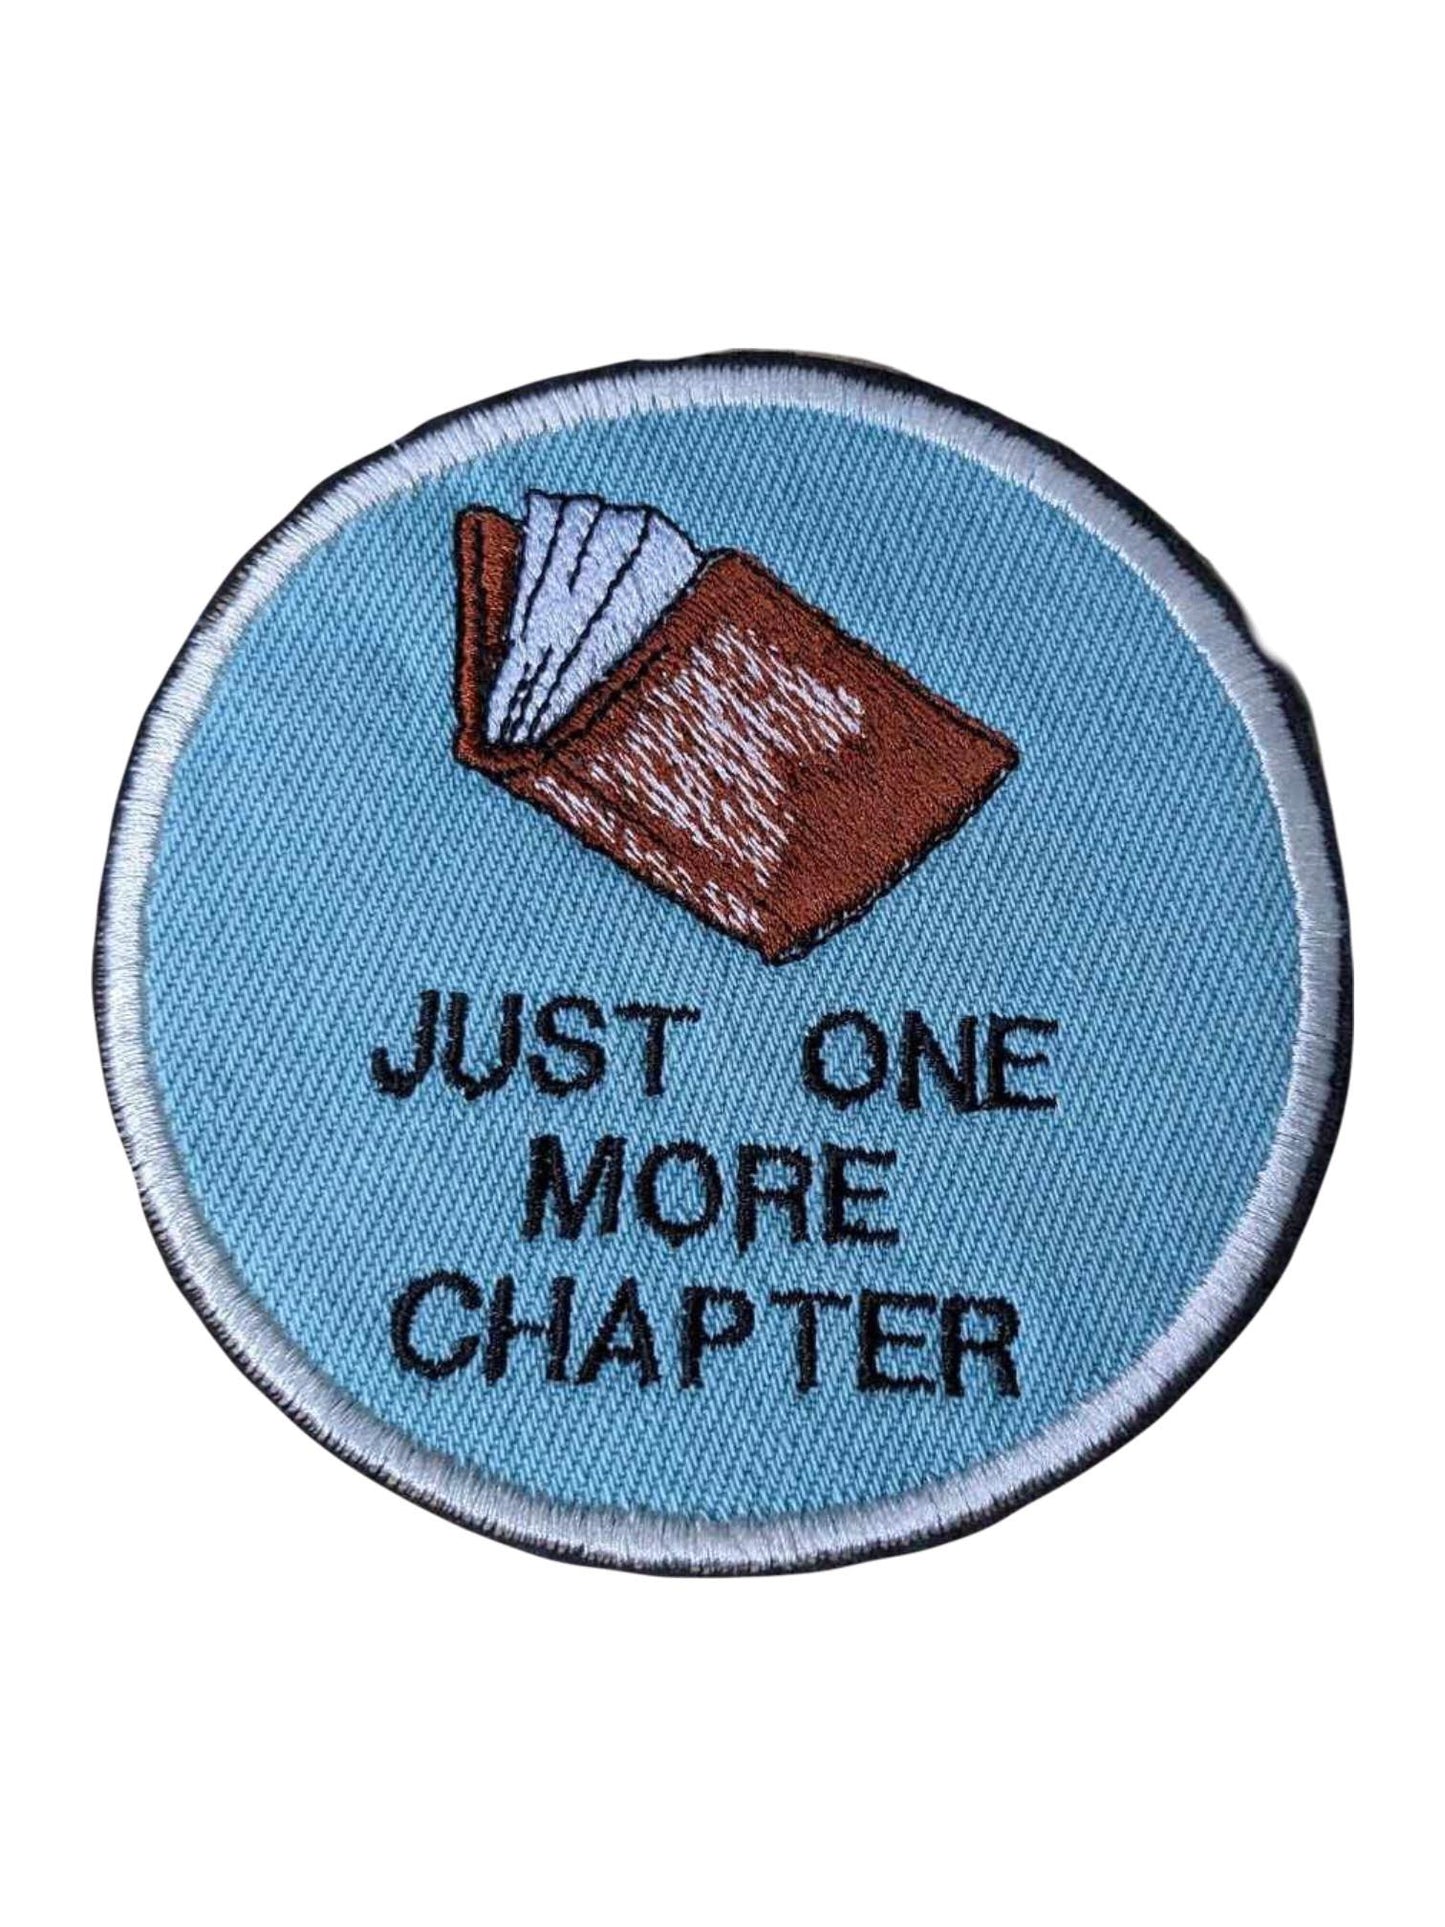 Bookish - Just One More Chapter - Recycled Denim Sew On Patch - Book Illustration Detail